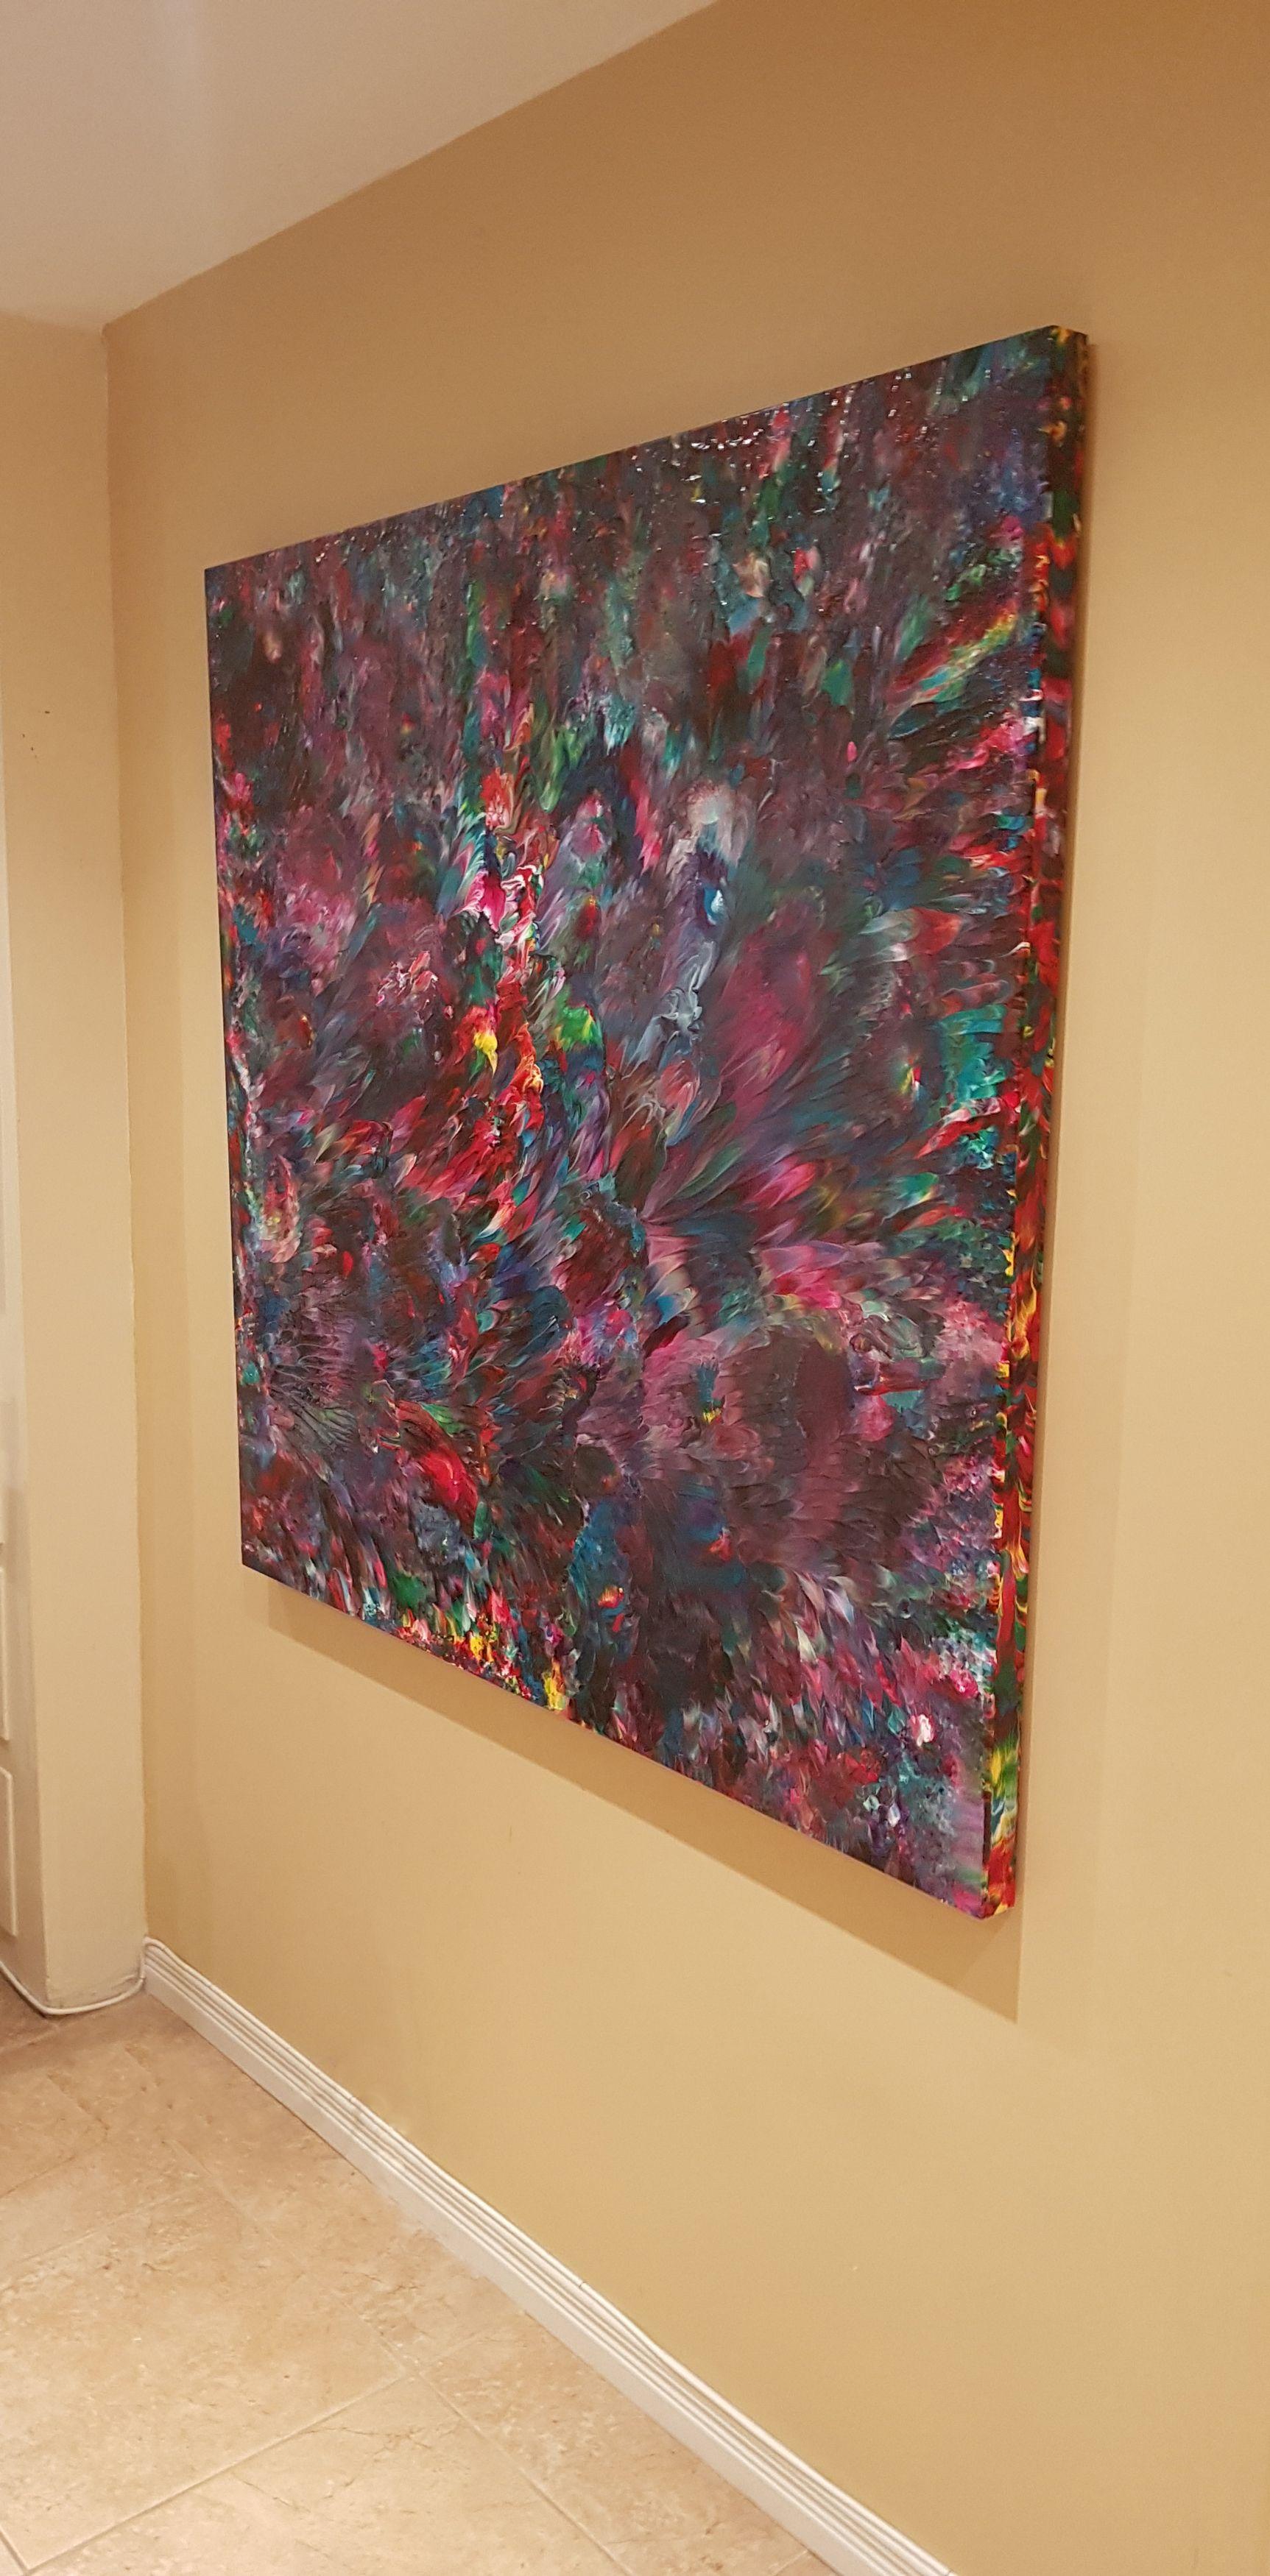 This large, expressive abstract painting is a beautiful combination of rich red-violet and dark, deep violet colors. Dark blues and vibrant accent colors, mainly red, pink, yellow, and green, flow together with interesting textures and a high-gloss